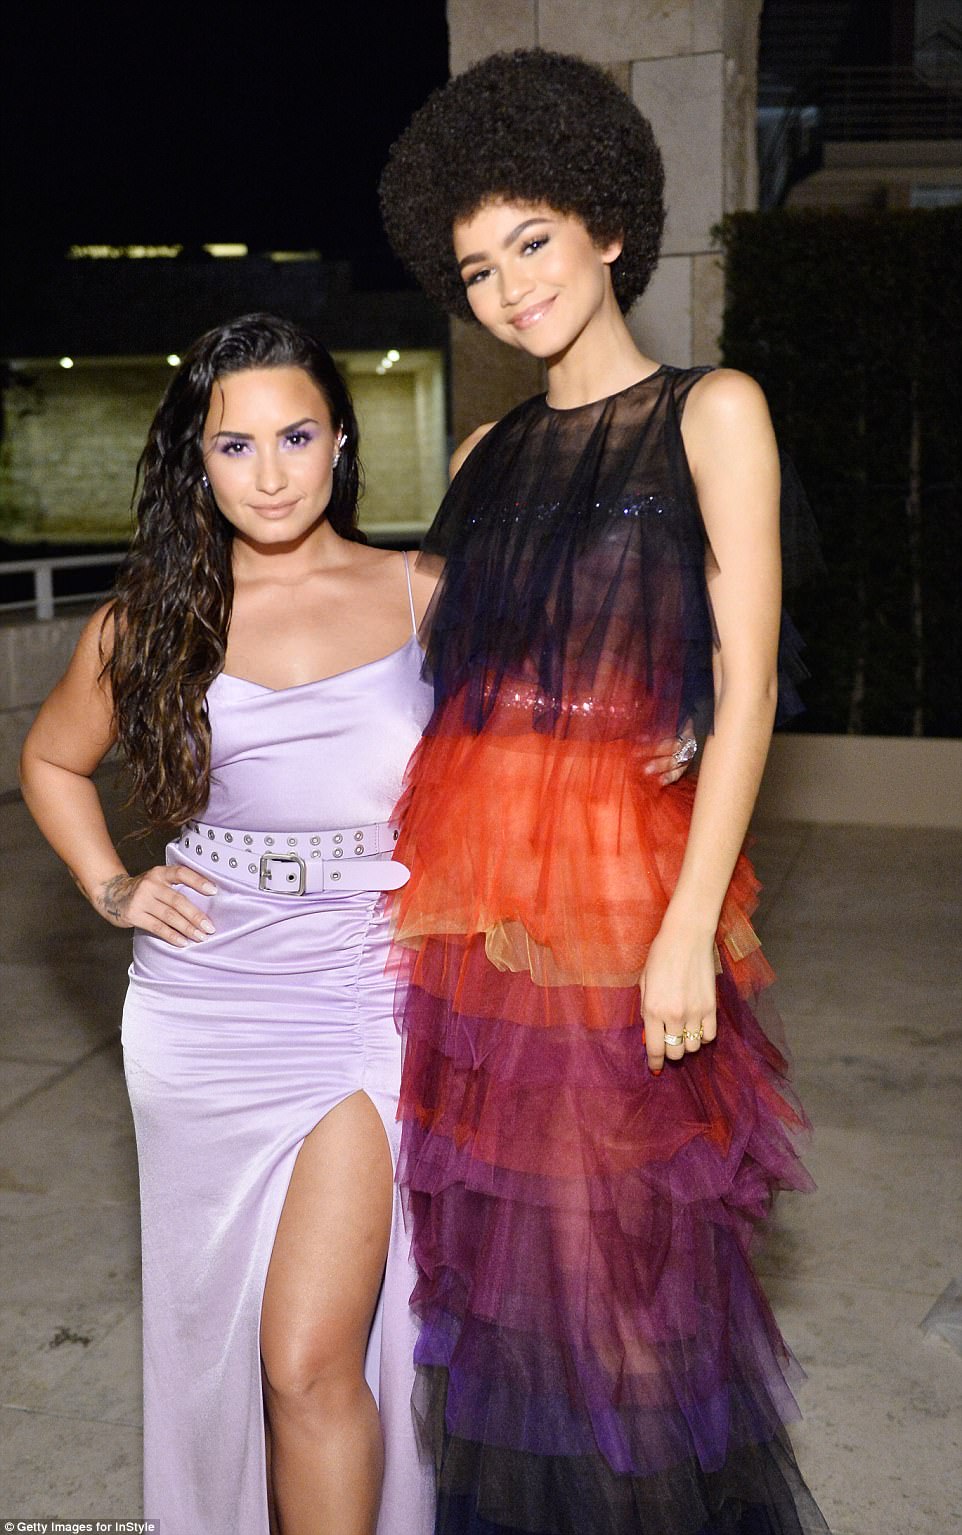 Shimmer goddesses: Demi and Zendaya dazzled in their colourful eye-catching gowns as they posed together 